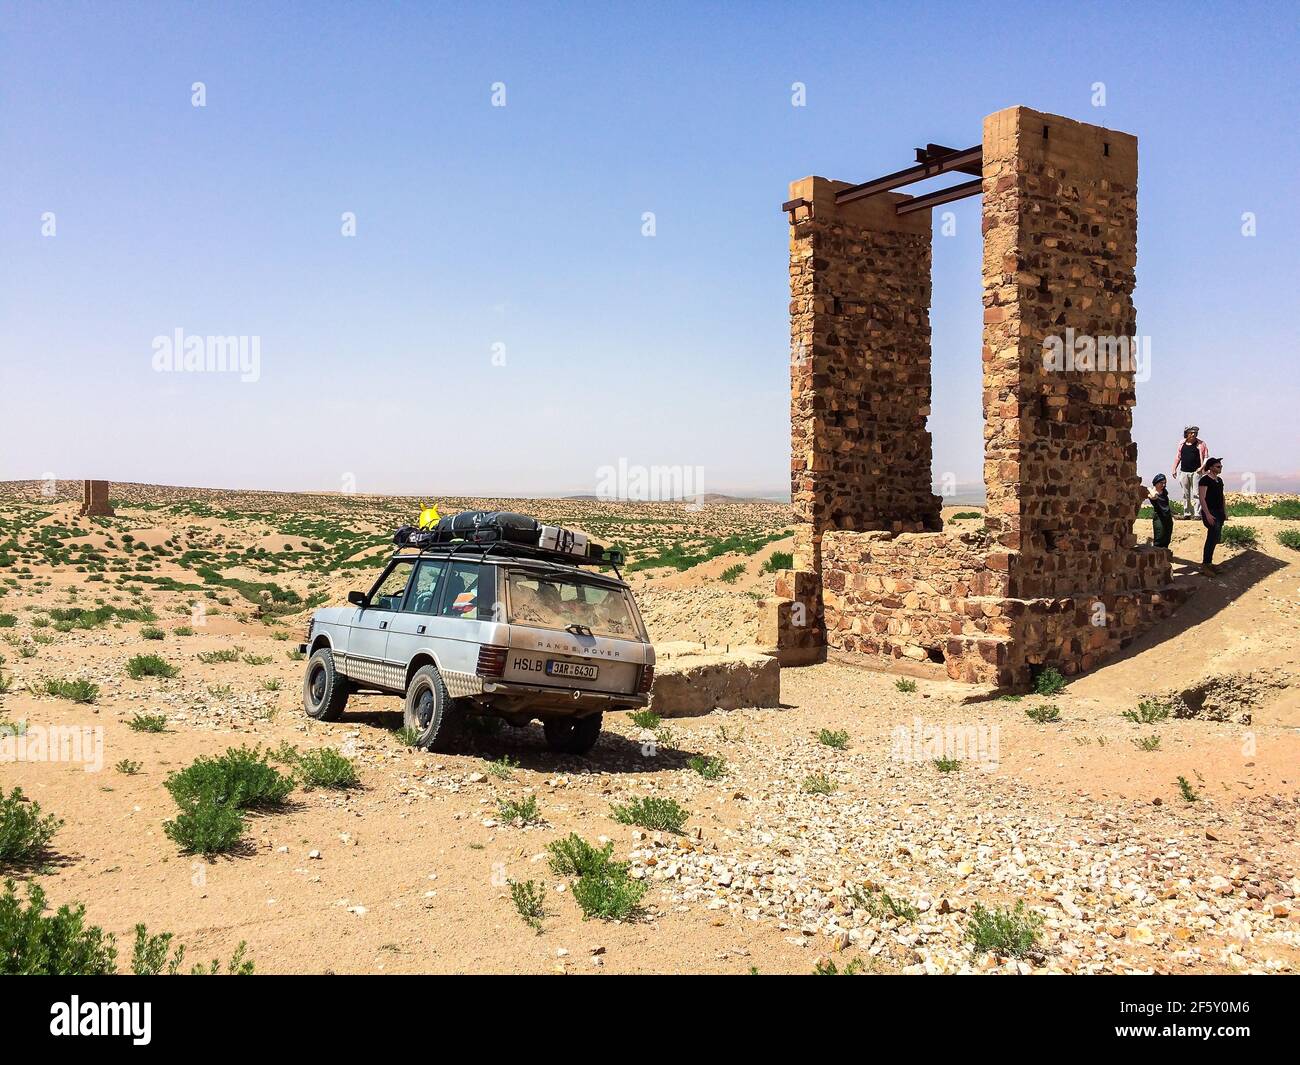 Zaida, Morocco - April 10, 2015. Old vintage silver off road car with travelers by stone water well in desert Stock Photo